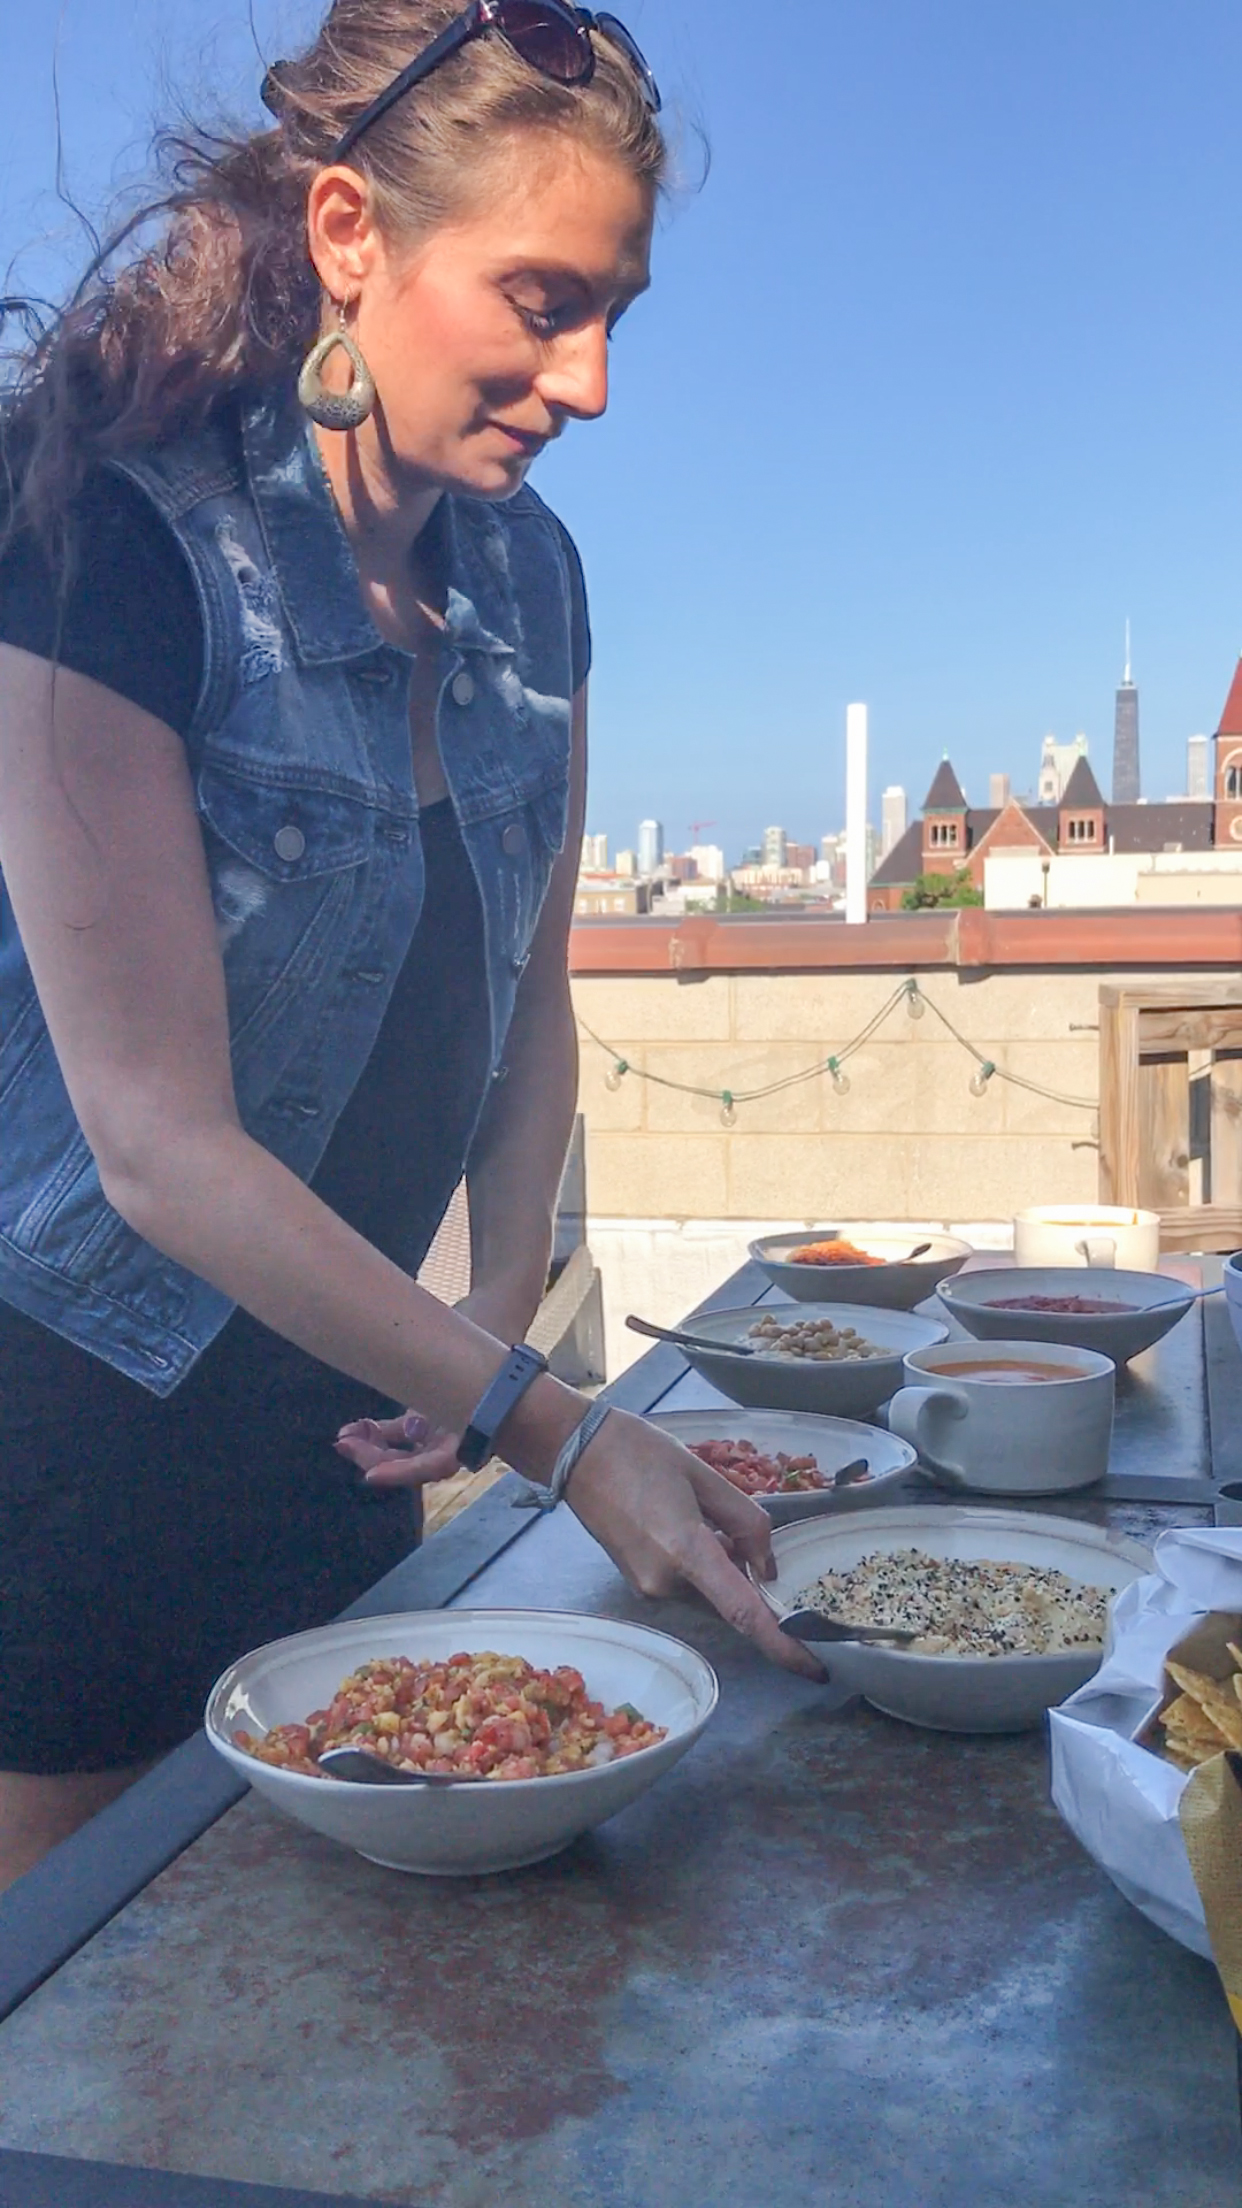 Shalva on our Chicago rooftop serving hummus, salsa, queso and veggies.